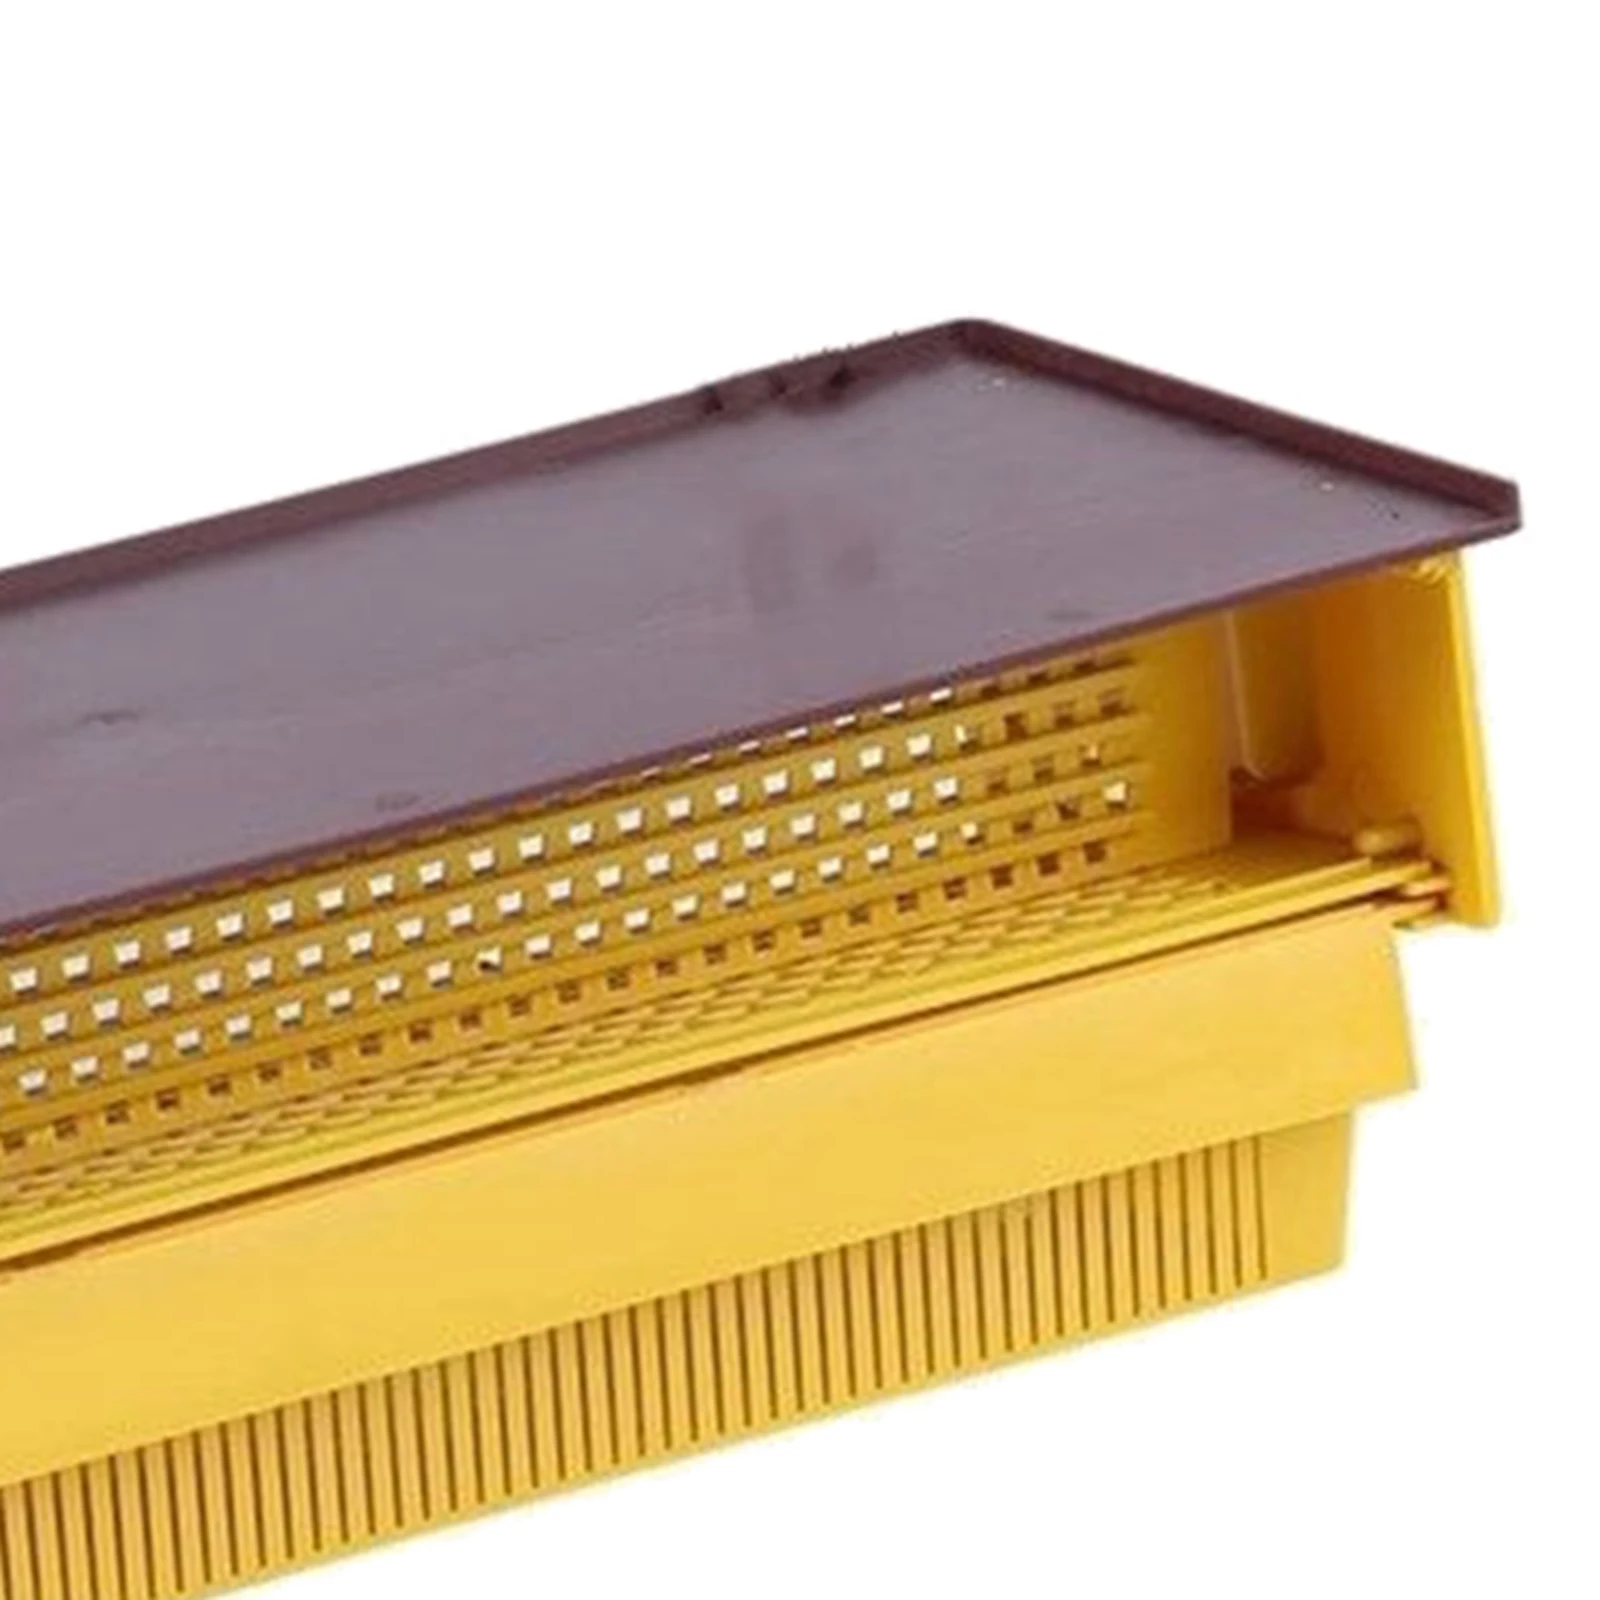 Beekeeping Pollen Trap Removable Pollen Tray Collector Yellow, Easily Adjusted and Assembled